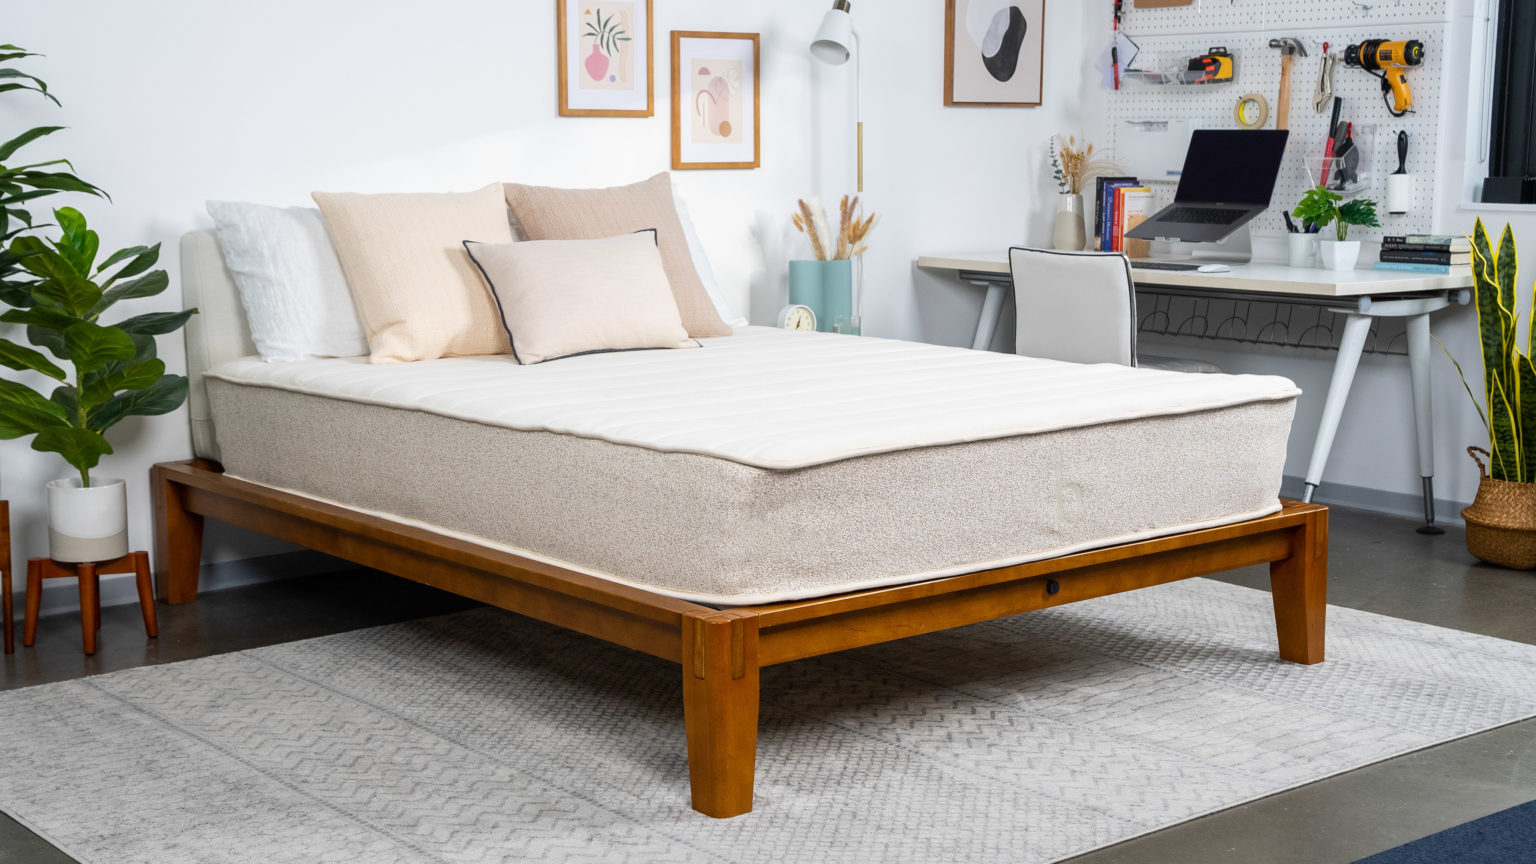 Choosing the Right Mattress to Get a Restful Night’s Sleep